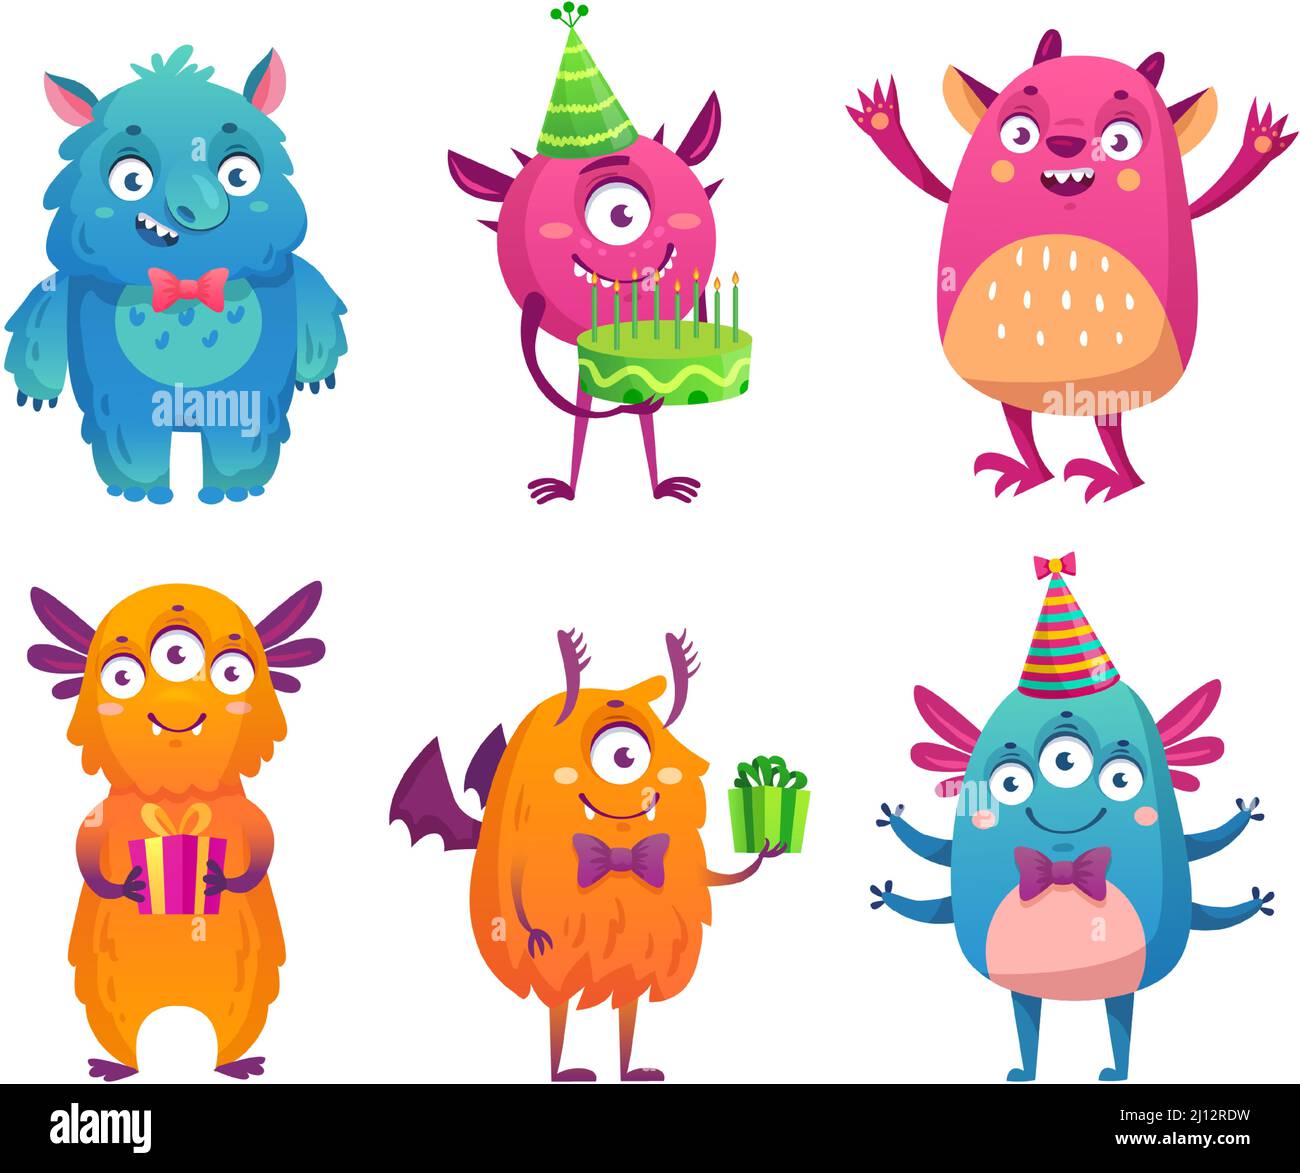 Cartoon party monsters celebrating happy event. Cute fluffy characters with friendly smiles holding birthday cake Stock Vector